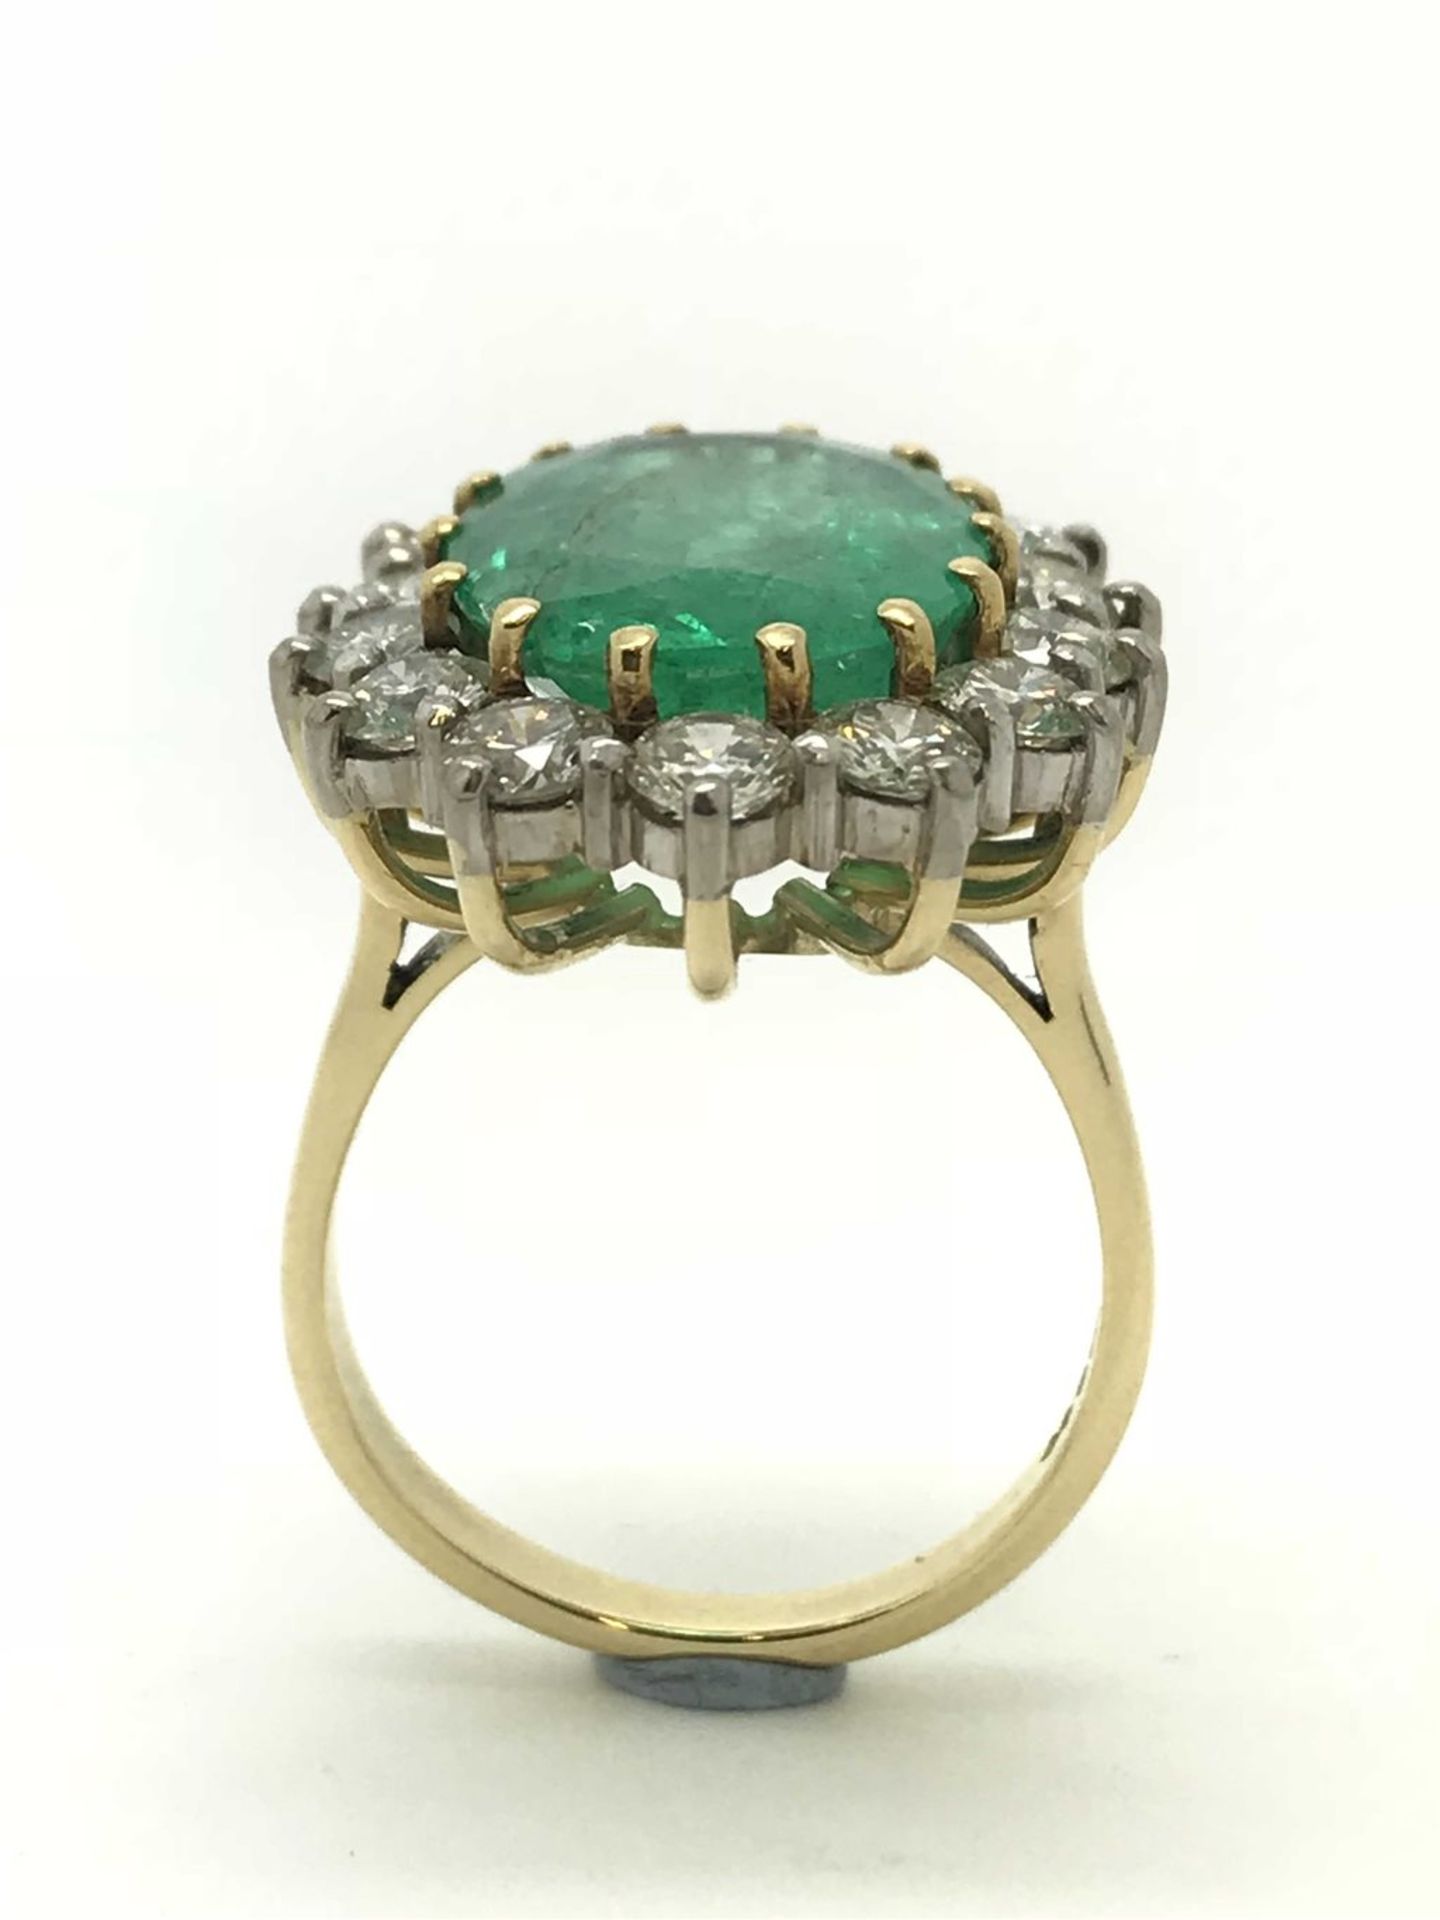 Emerald (6.93ct) & Diamond (2.10ct) Large Cluster Ring - 18ct Gold - Image 3 of 5